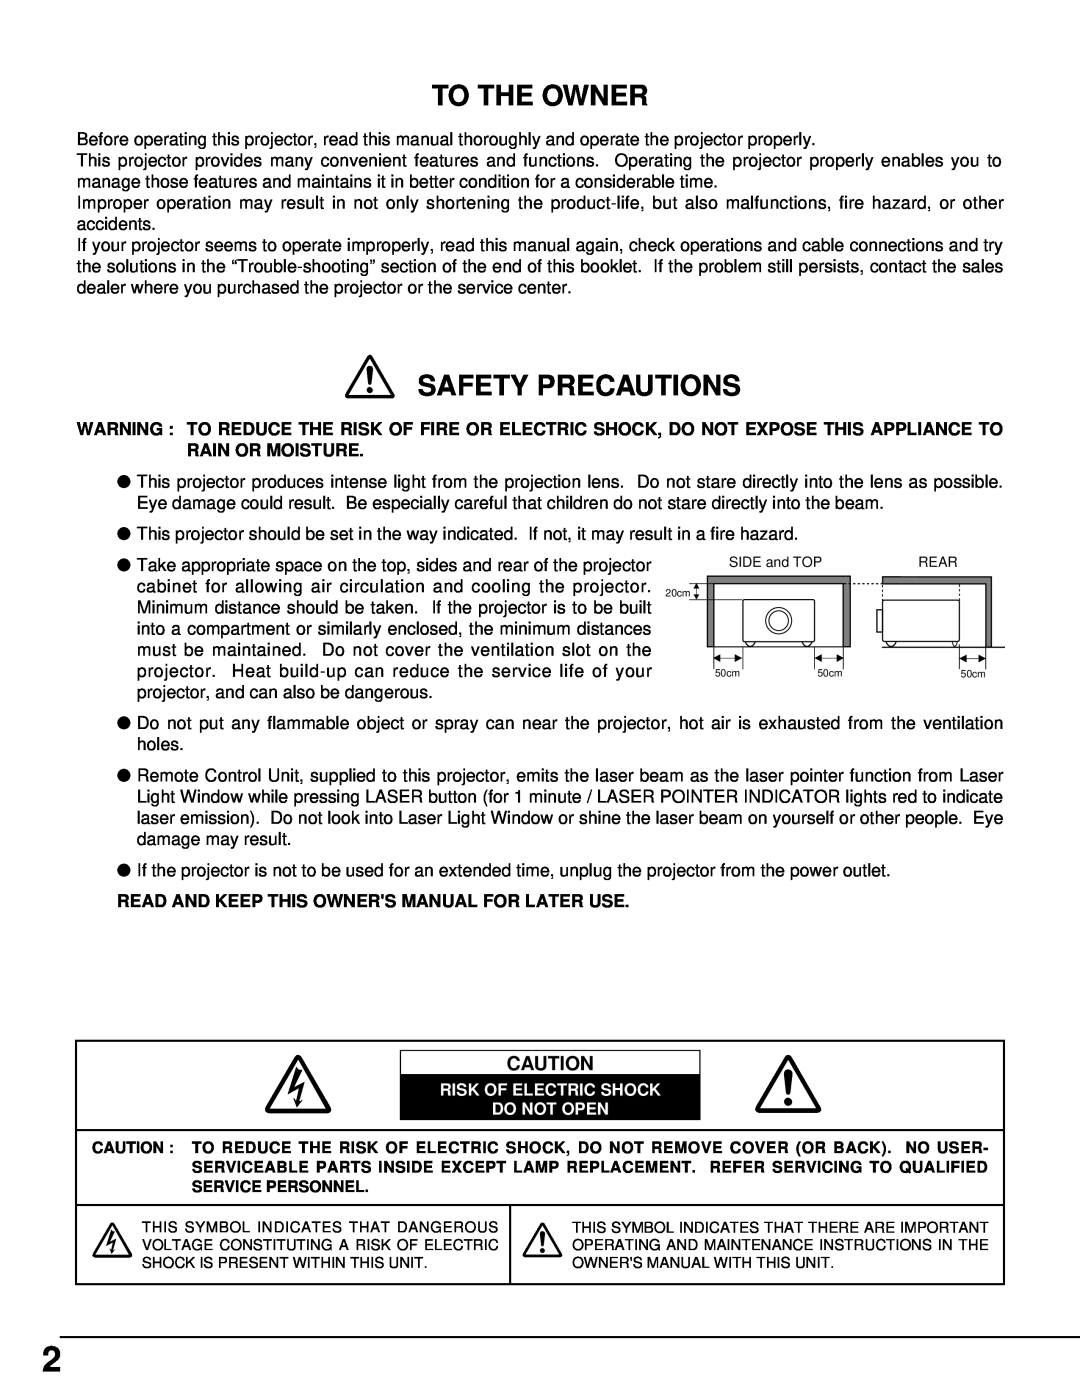 Eiki LC-NB3W owner manual To The Owner, Safety Precautions, Risk Of Electric Shock Do Not Open 